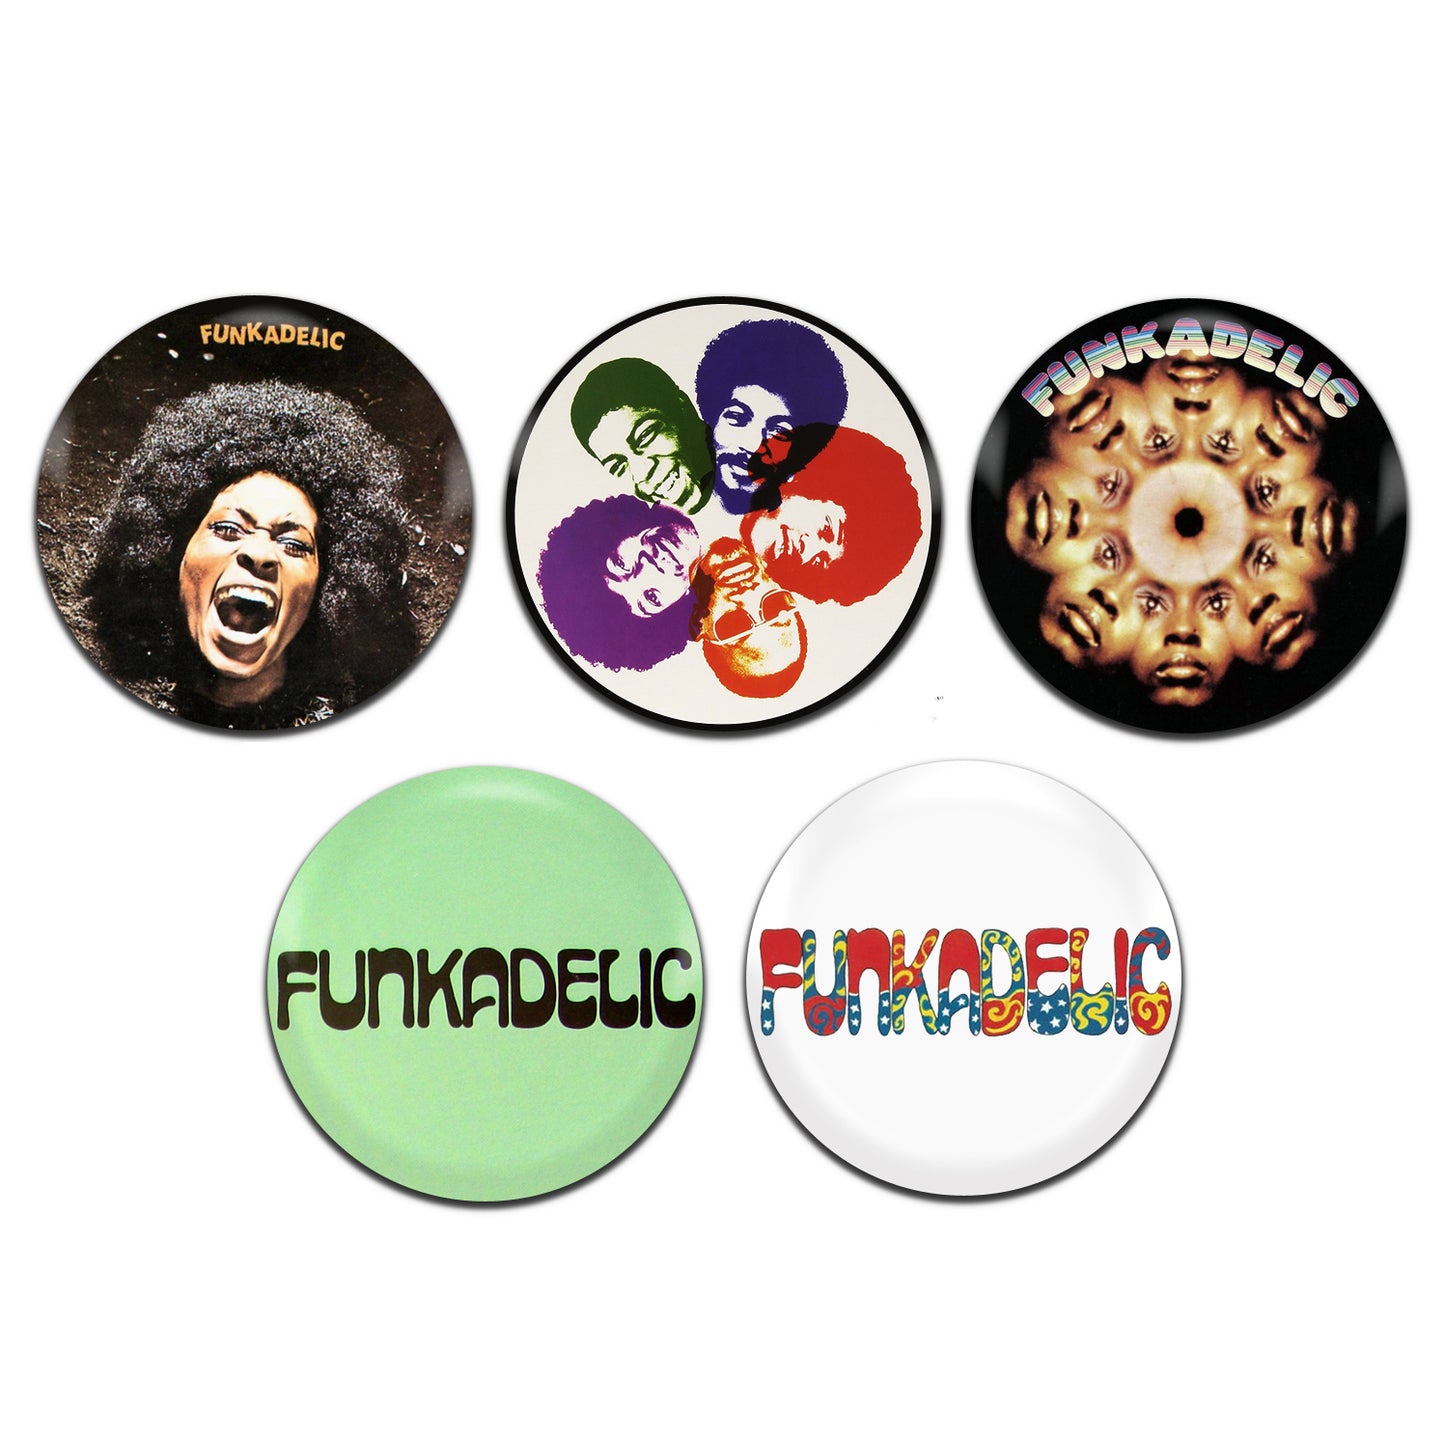 Funkadelic Funk Psychedelic Rock Band 70's 25mm / 1 Inch D-Pin Button Badges (5x Set)